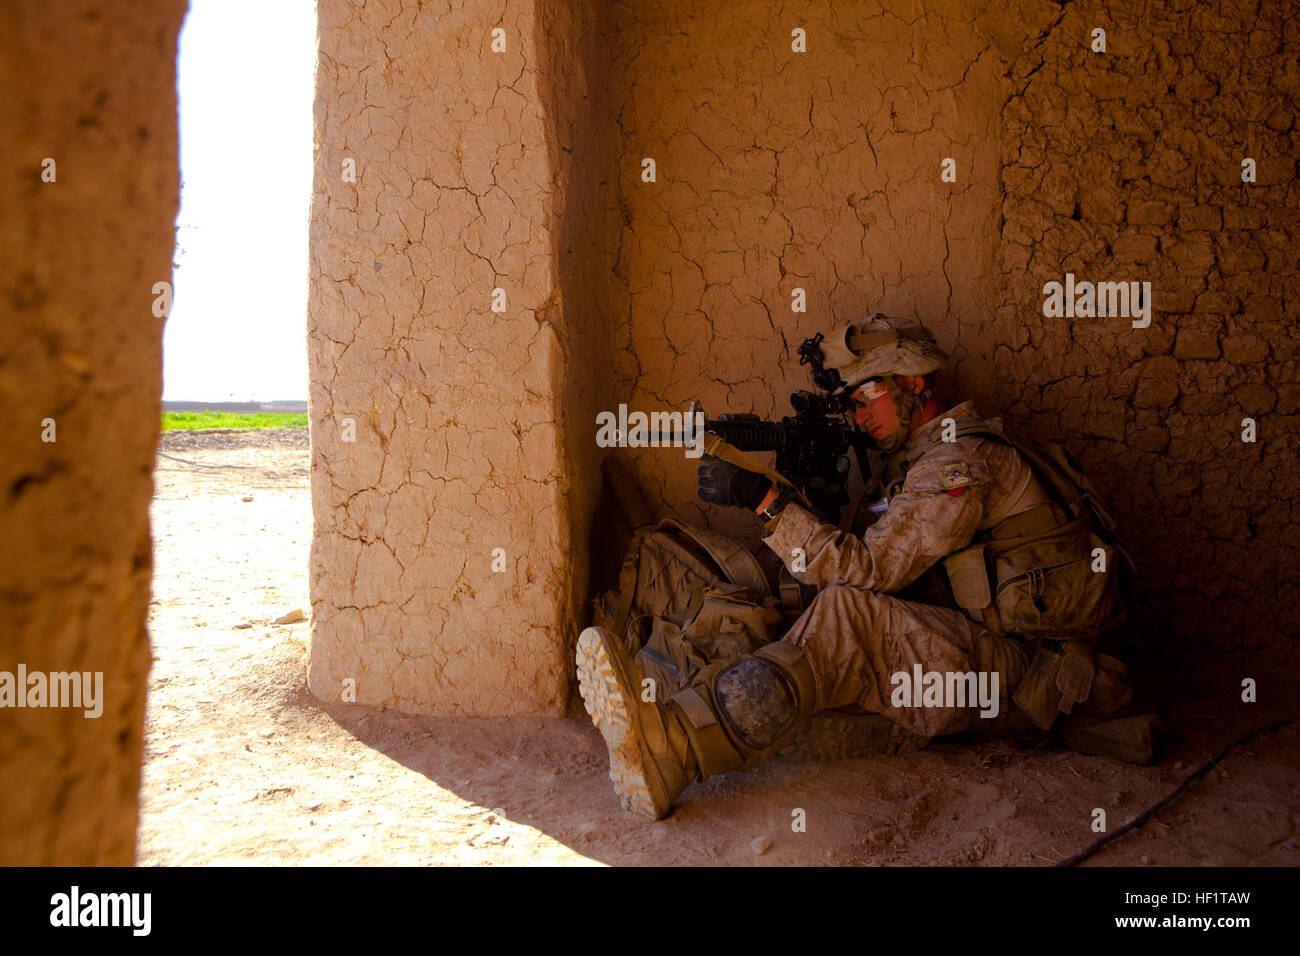 Lance Cpl. Nathan Gulbronson, a Lambertville, Mich., native and rifleman with 1st Battalion, 9th Marines, crouches inside a building while searching for insurgents near the Bari Gul Bazaar, Nad Ali District, Helmand province, Afghanistan, Dec. 4, 2013. Gulbronson posted as security at the far end of a desert compound while his fellow Marines searched the building for lethal aid. Under Fire 131204-M-ZB219-172 Stock Photo